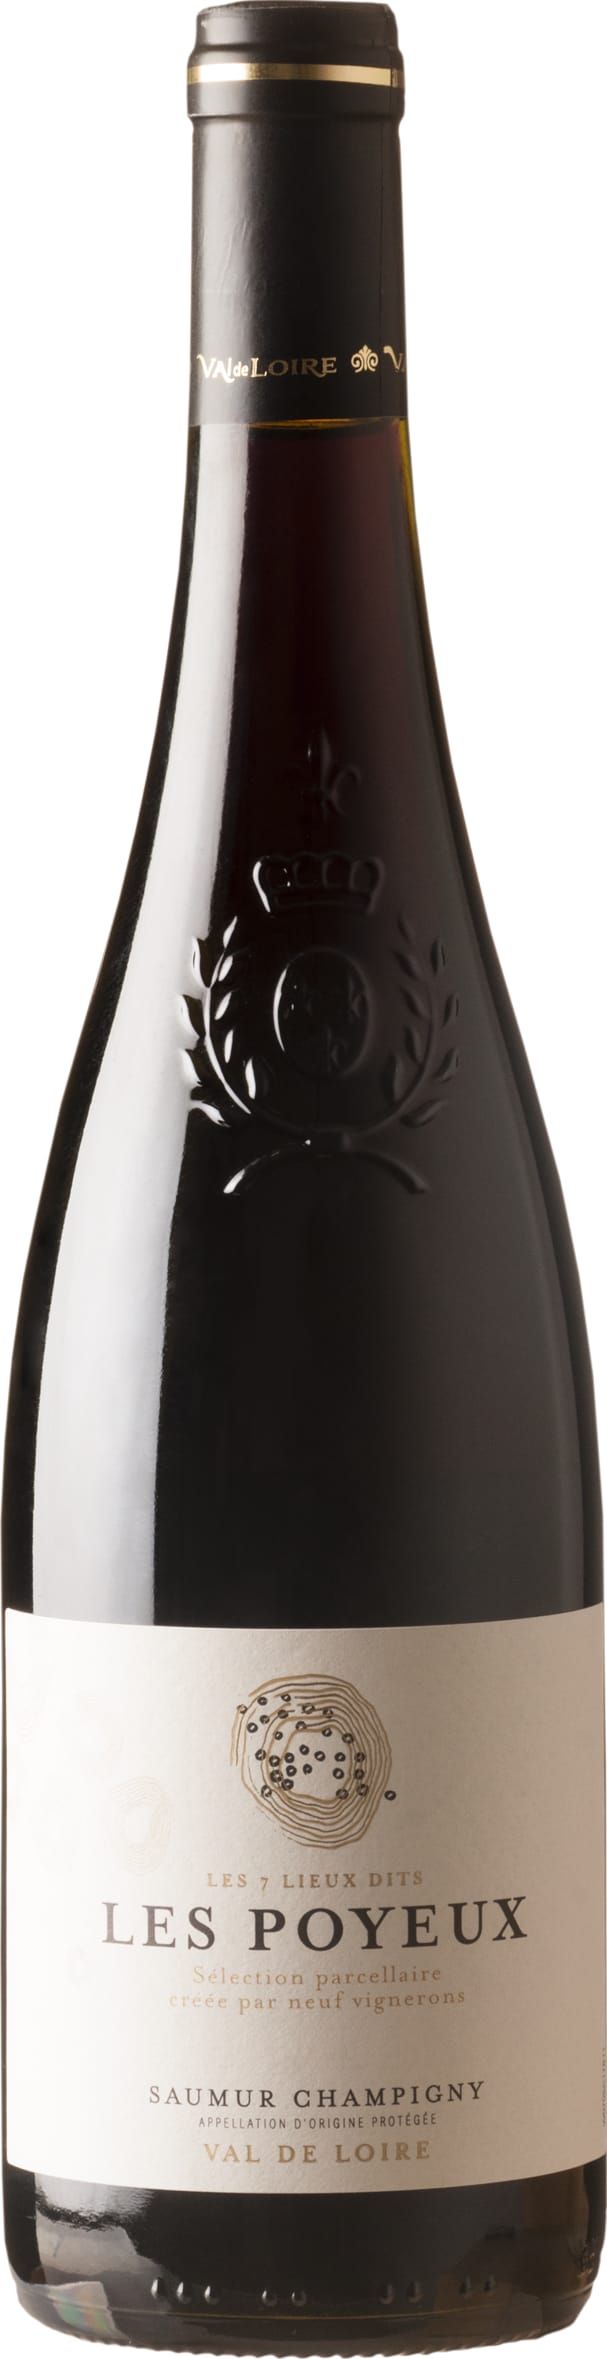 Les Poyeux Saumur-Champigny 2021 75cl - Buy Les Poyeux Wines from GREAT WINES DIRECT wine shop